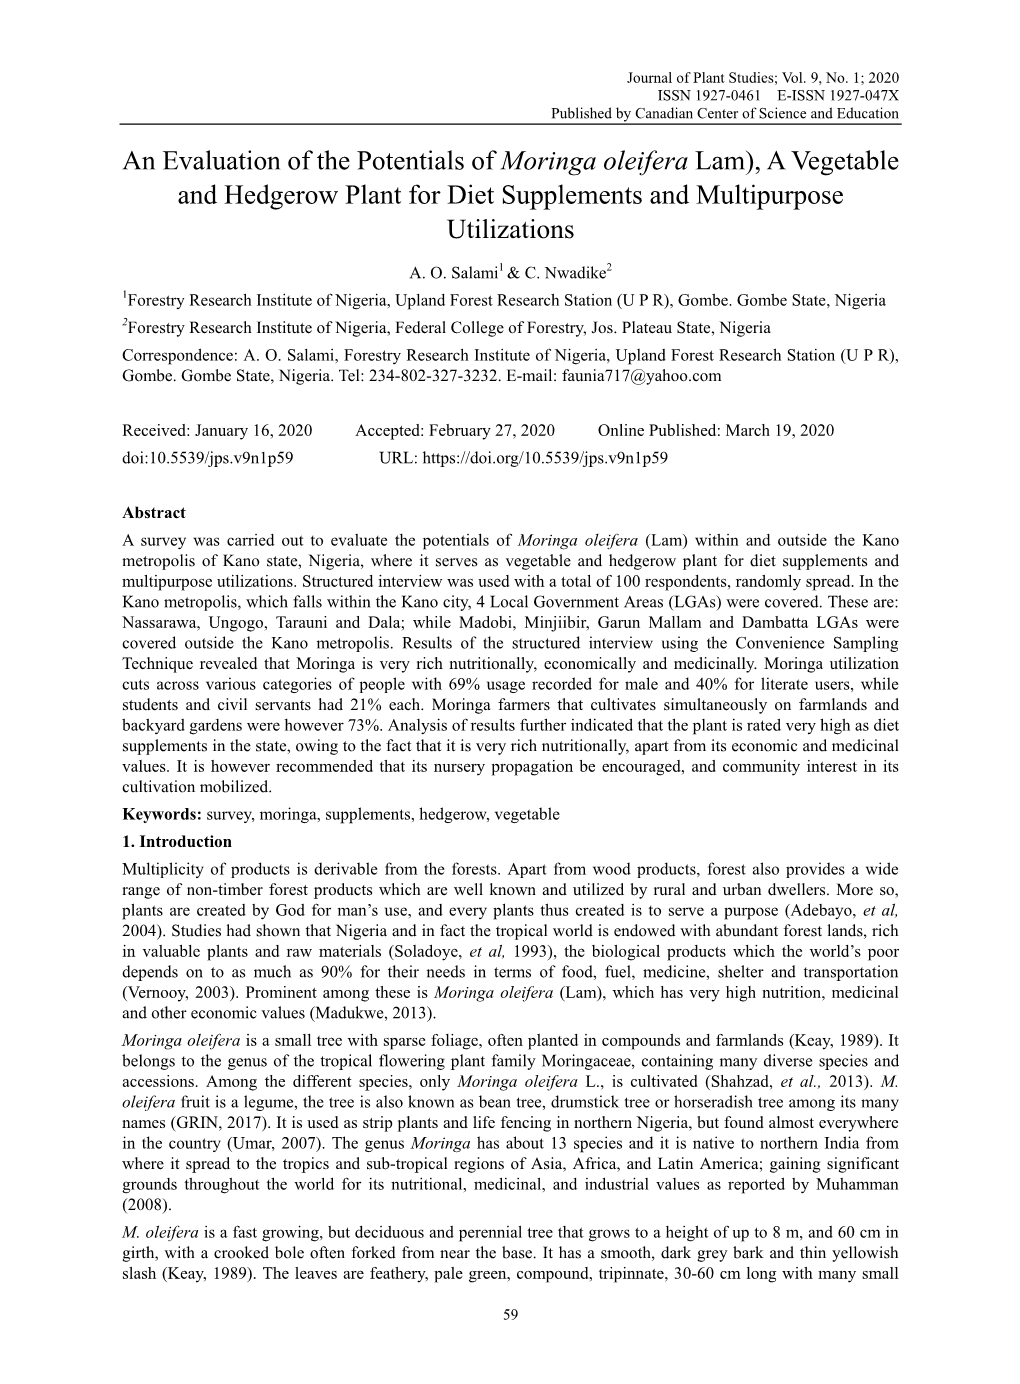 An Evaluation of the Potentials of Moringa Oleifera Lam), a Vegetable and Hedgerow Plant for Diet Supplements and Multipurpose Utilizations